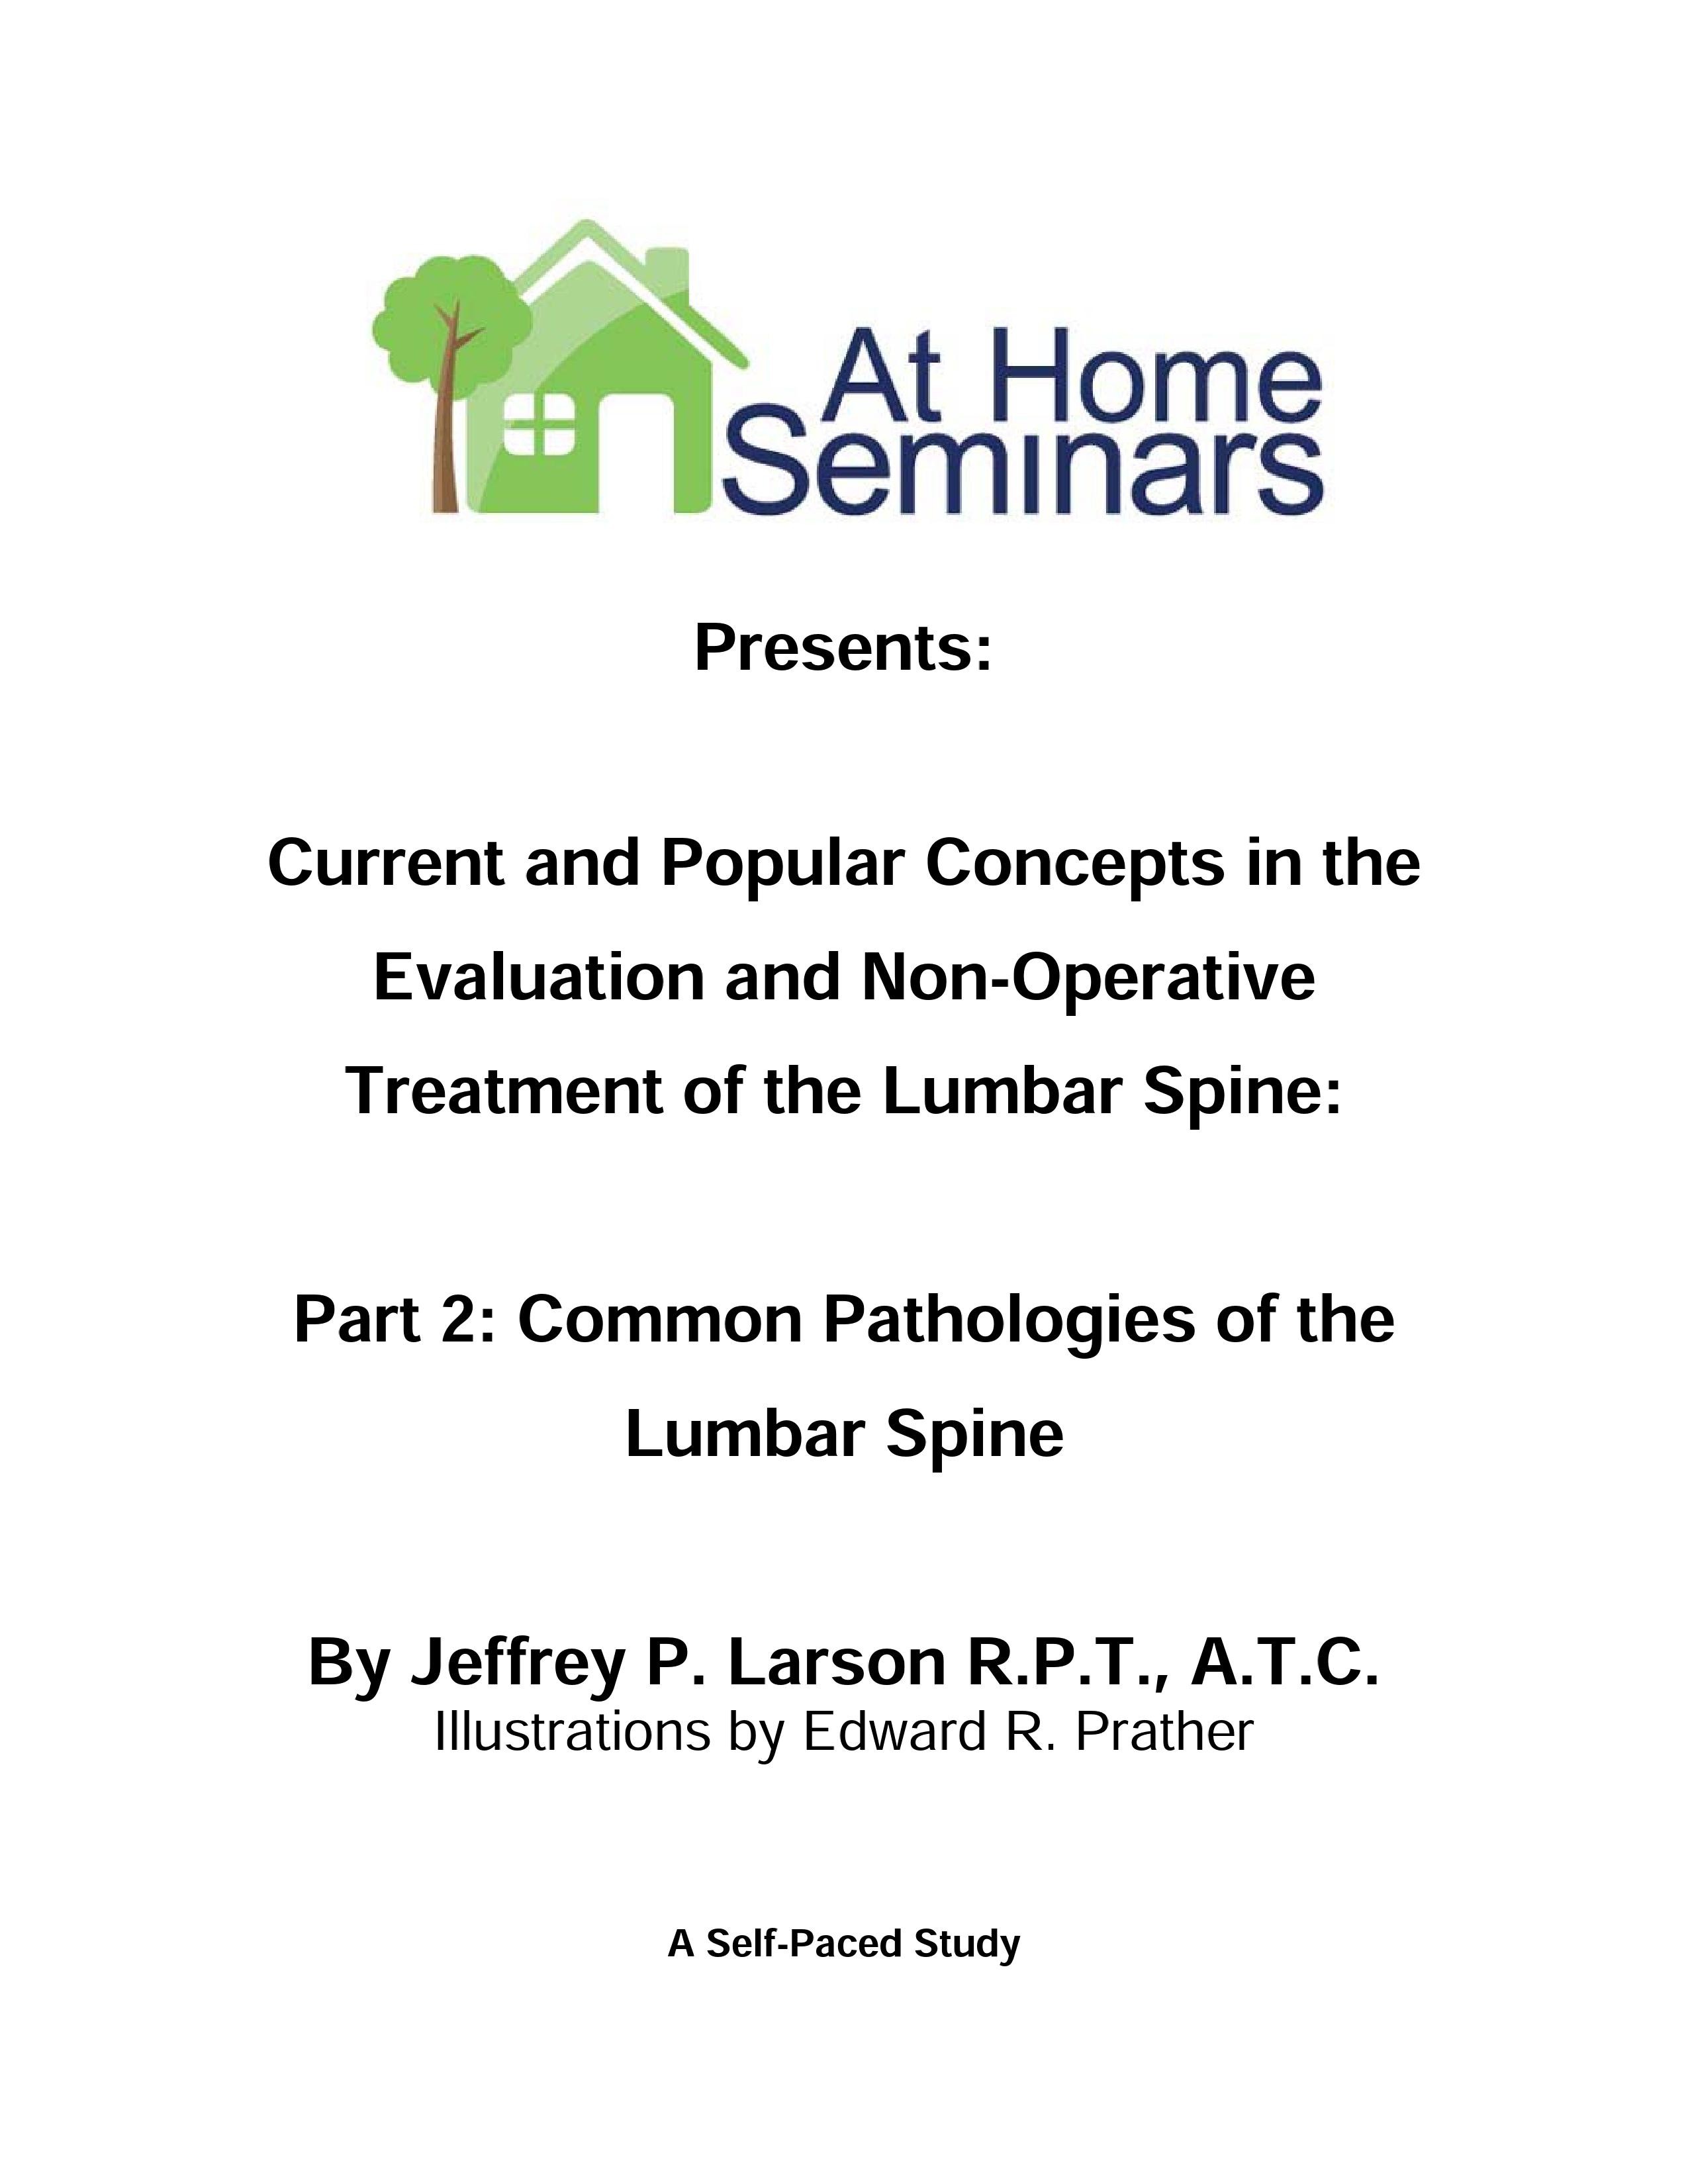 Share A Course: Current & Popular Concepts in the Evaluation and Non-Operative Treatment of the Lumbar Spine: Part 2: Common Pathologies of the Lumbar Spine